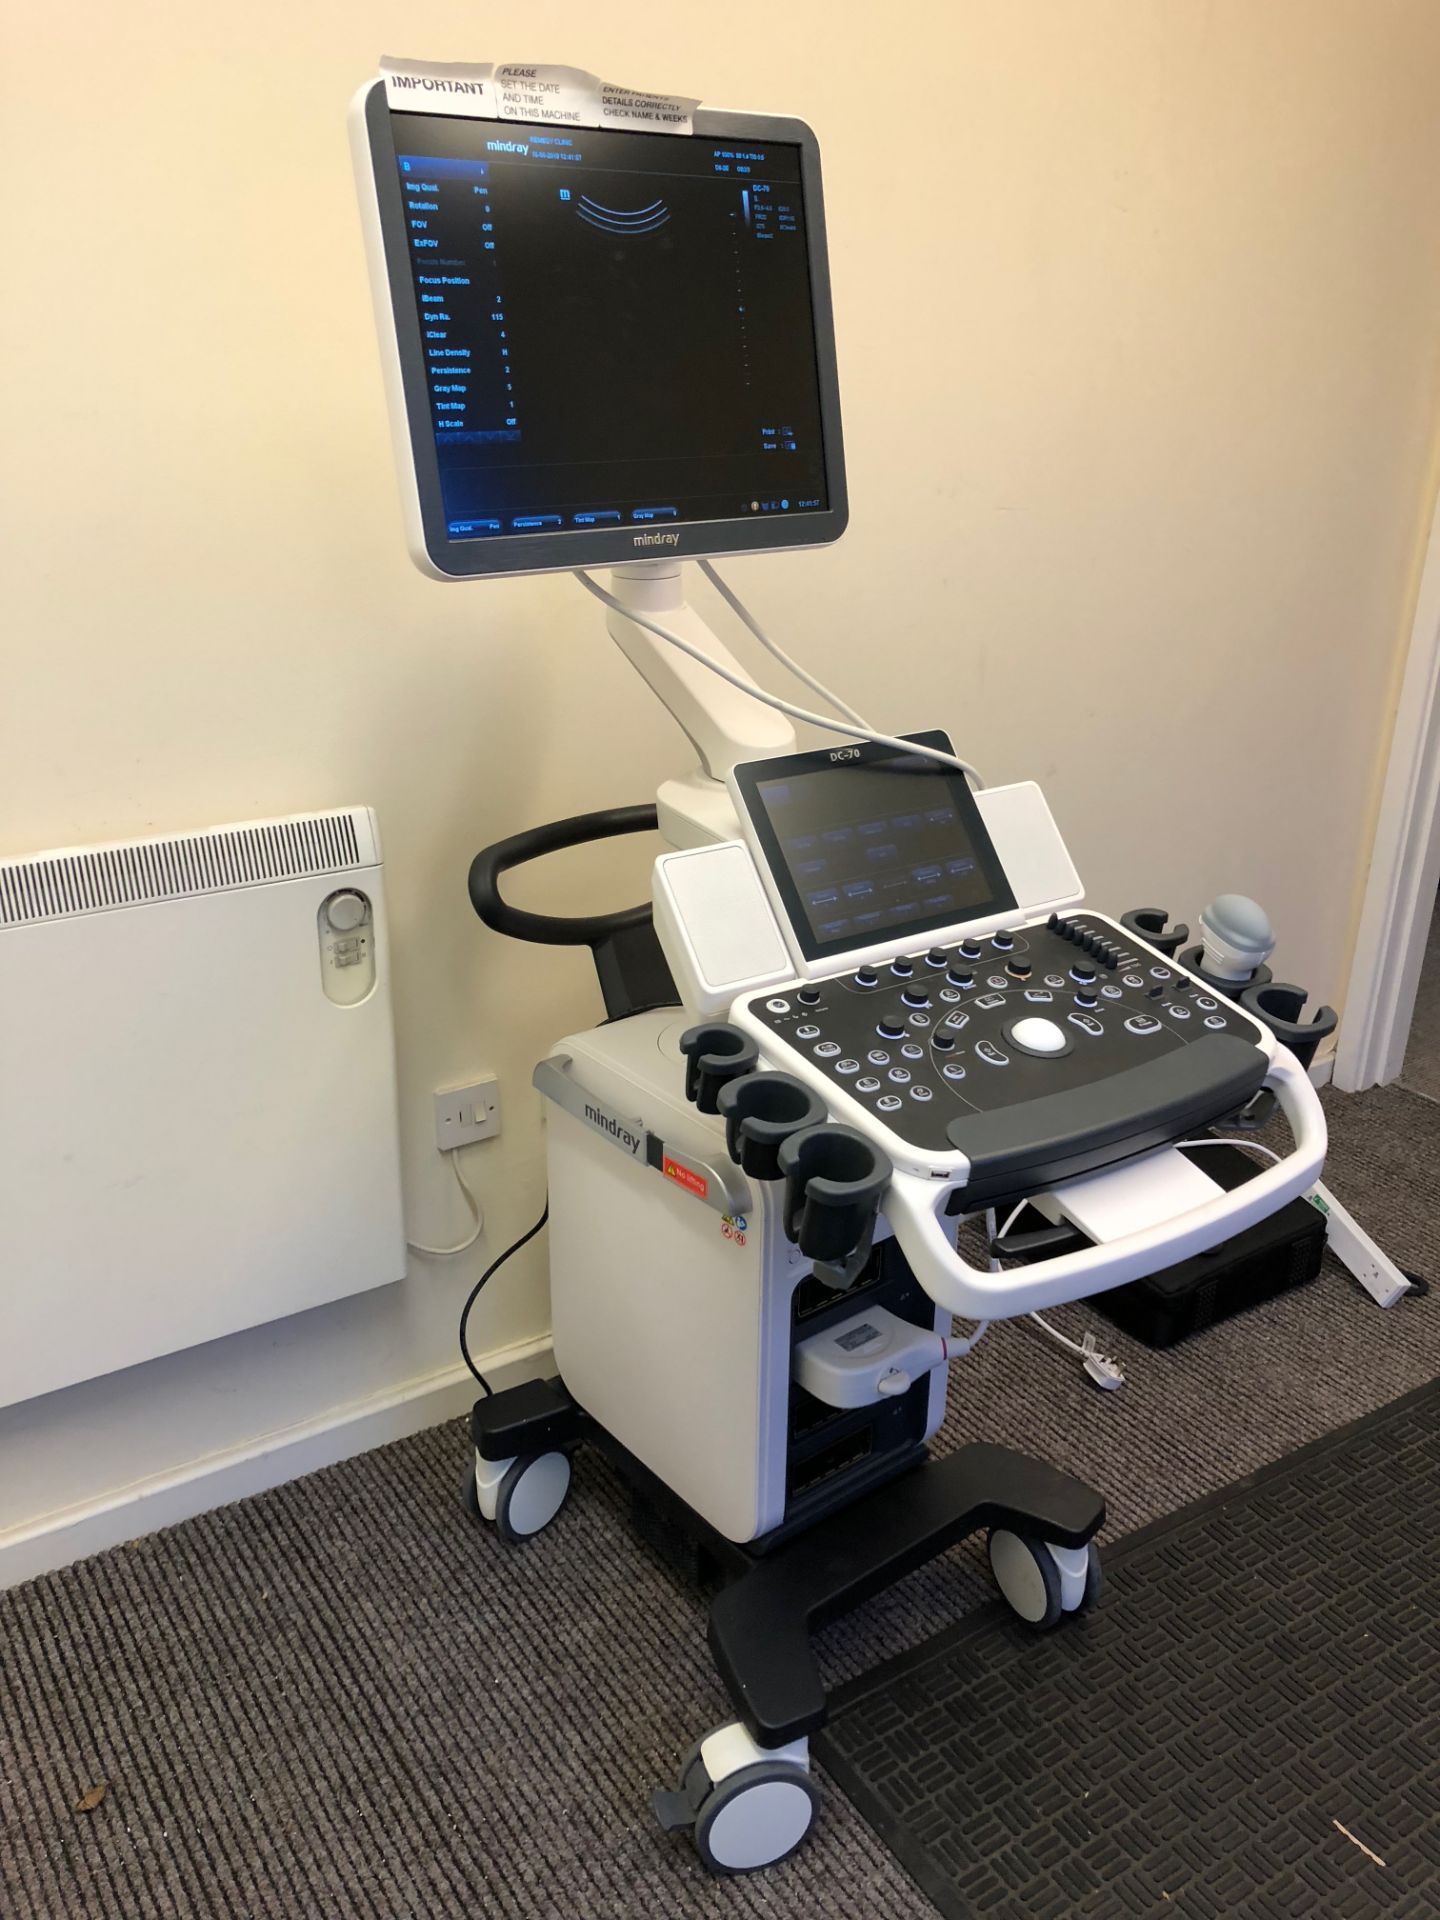 Mindray, DC-70 Ultrasound Complete with 4 Transducers - 4D system - Image 5 of 13